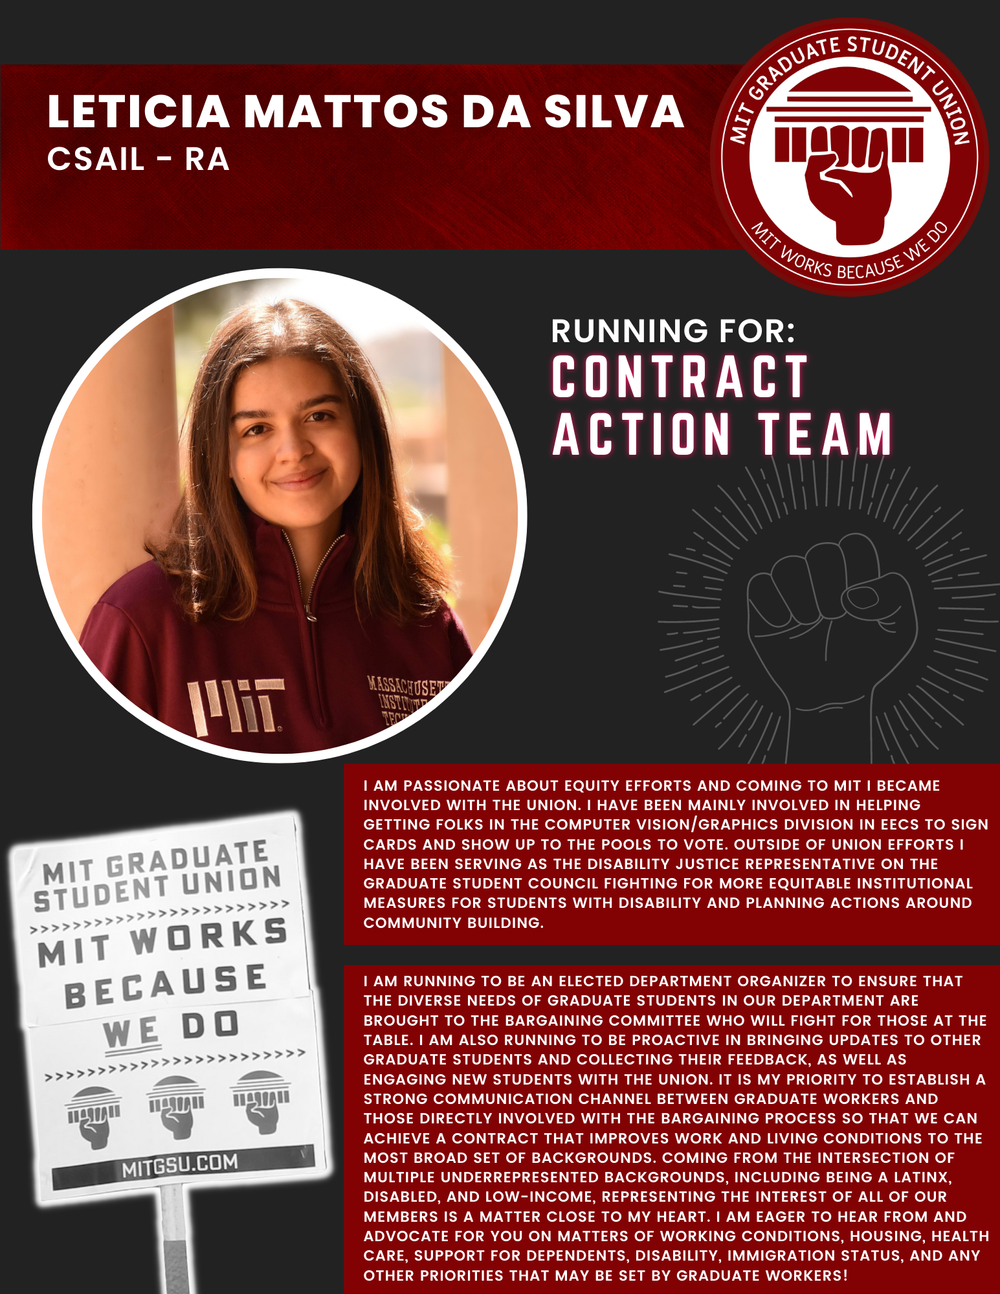  LETICIA MATTOS DA SILVA CSAIL - RA   RUNNING FOR: Contract Action Team  I AM PASSIONATE ABOUT EQUITY EFFORTS AND COMING TO MIT I BECAME INVOLVED WITH THE UNION. I HAVE BEEN MAINLY INVOLVED IN HELPING GETTING FOLKS IN THE COMPUTER VISION/GRAPHICS DIV